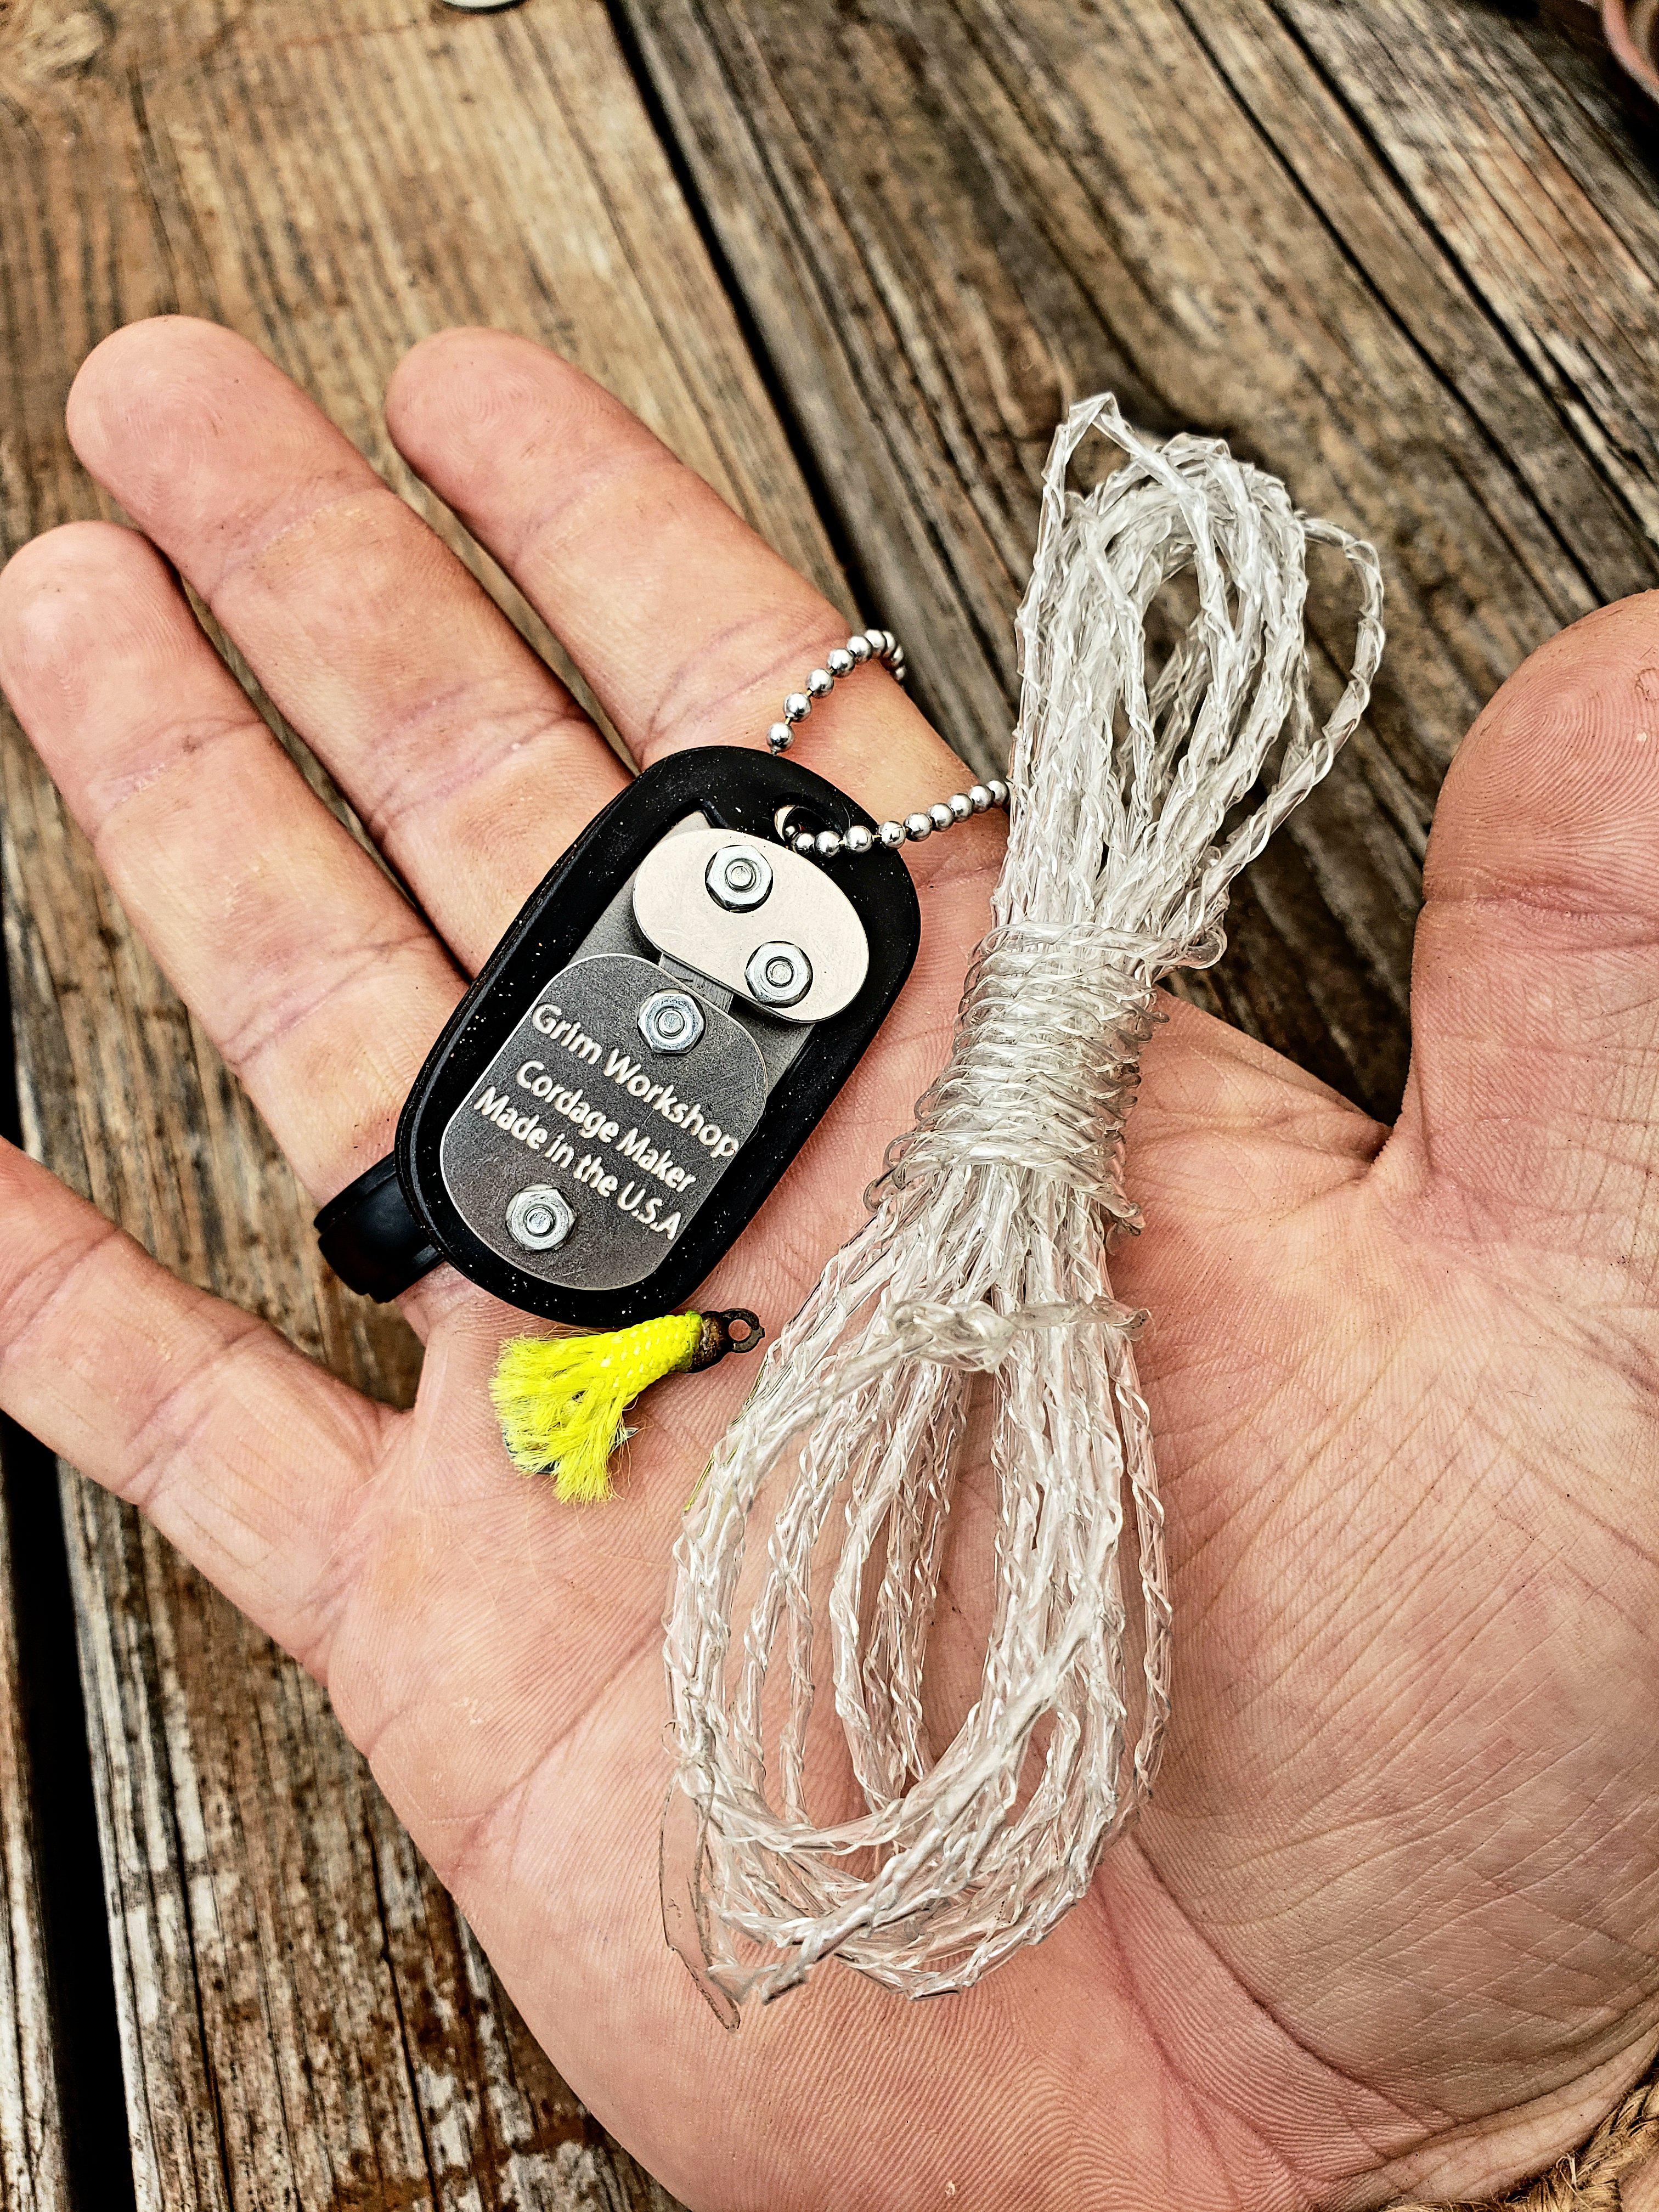 Cordage Making Dog Tag Necklace Tool-Grimworkshop-bugoutbag-bushcraft-edc-gear-edctool-everydaycarry-survivalcard-survivalkit-wilderness-prepping-toolkit